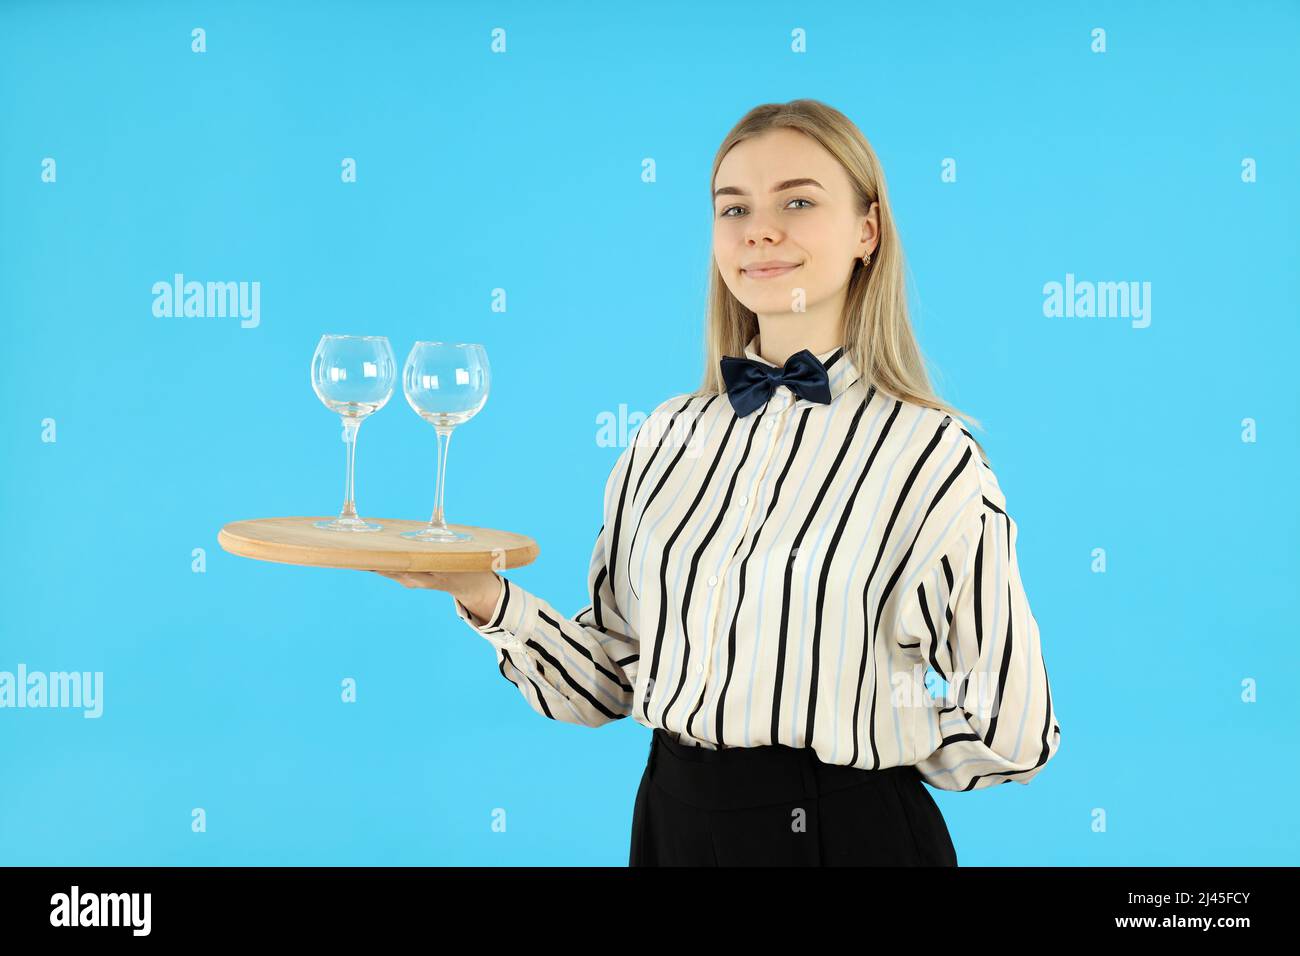 Concept of job with young woman waiter Stock Photo